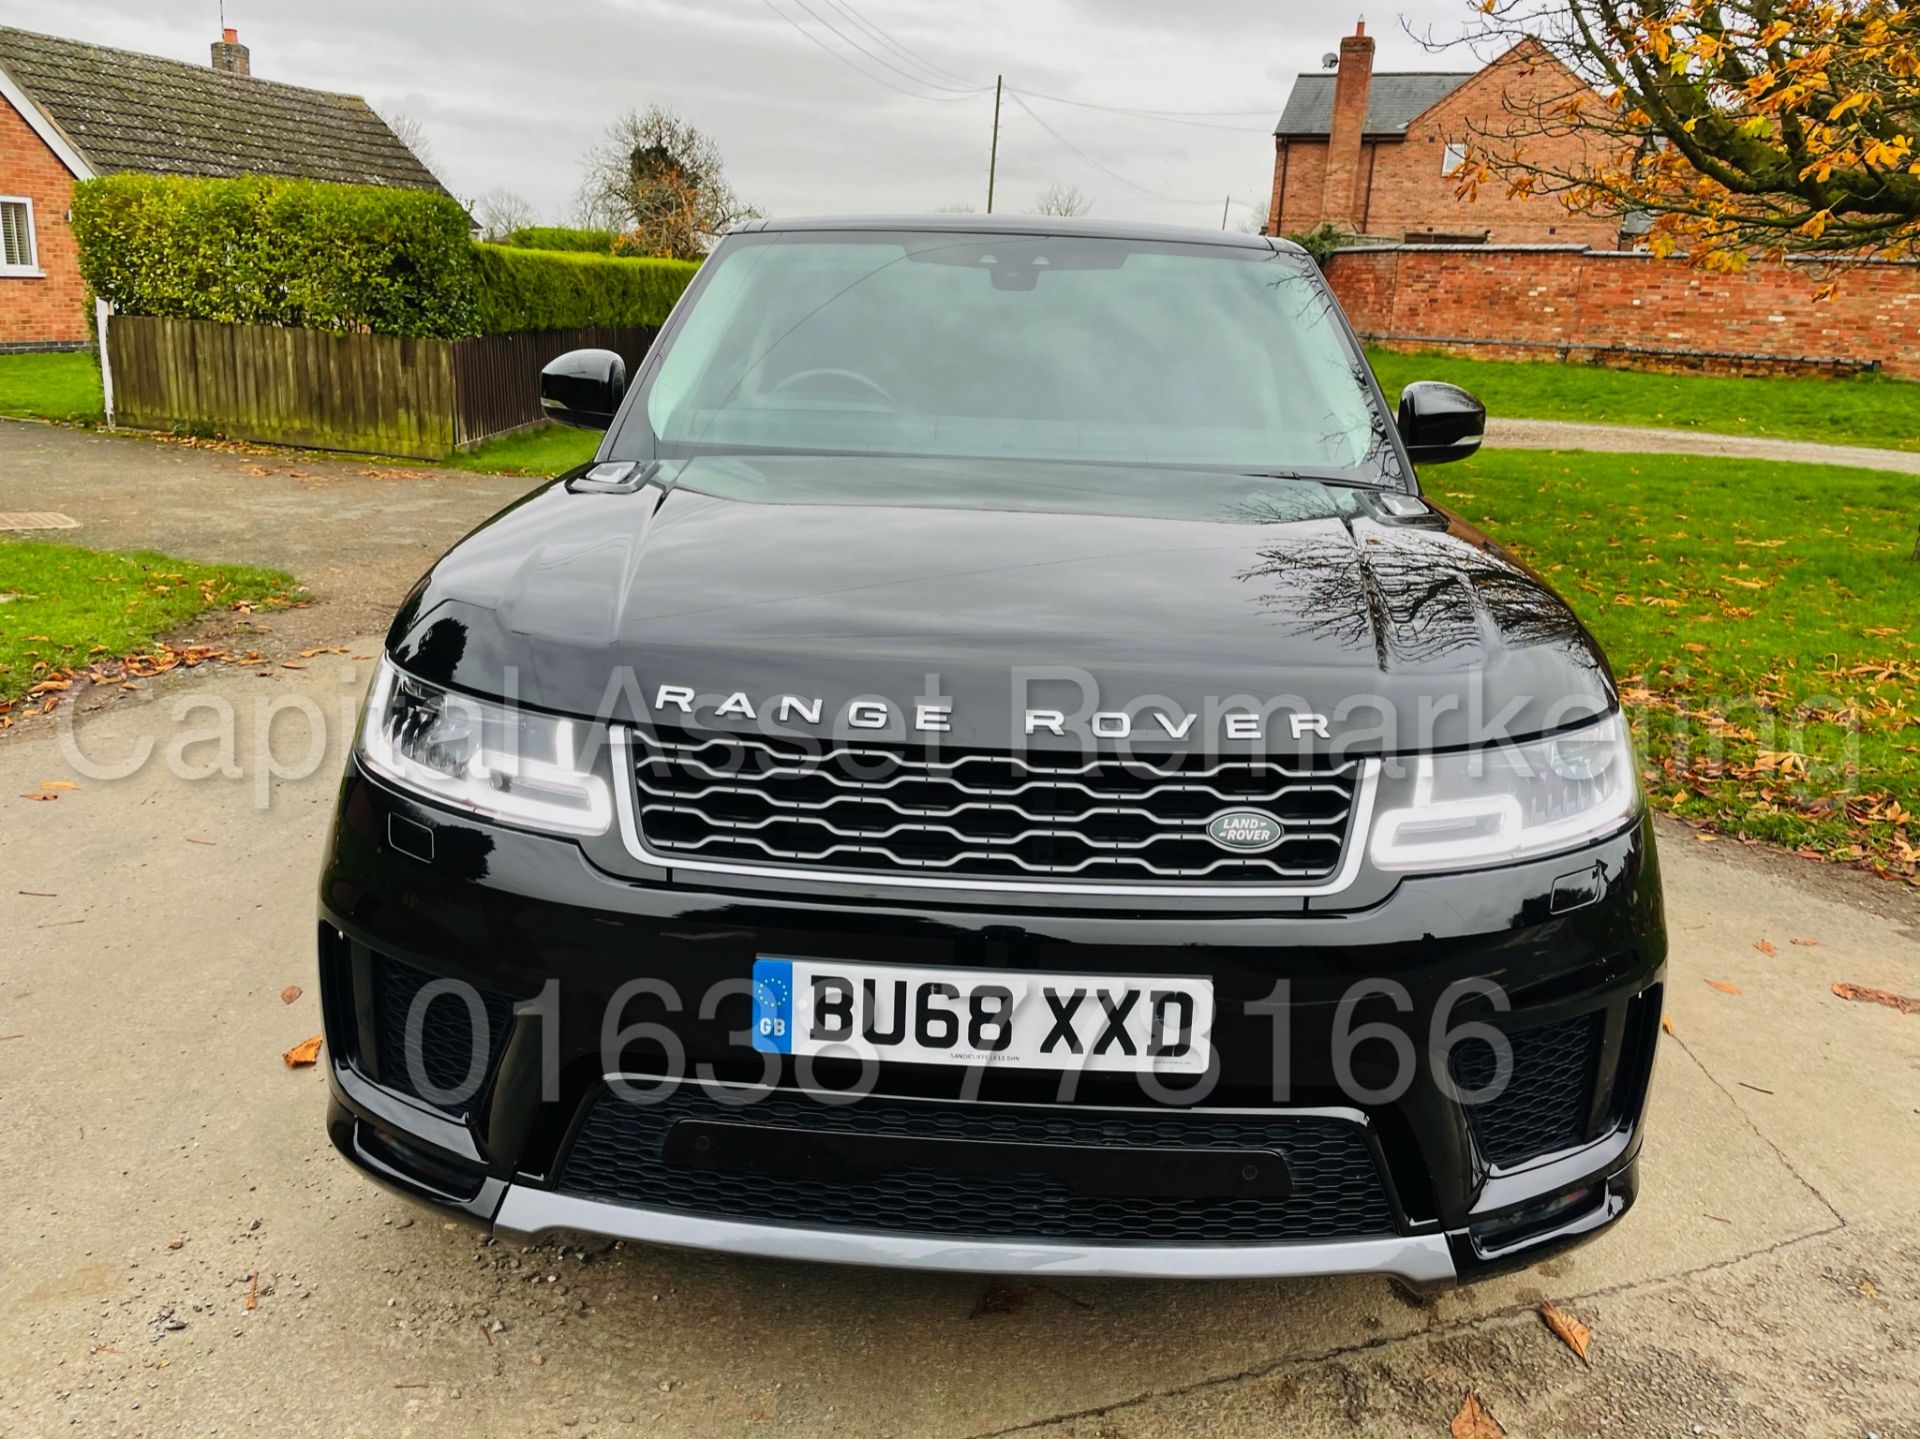 RANGE ROVER SPORT *HSE EDITION* SUV (2019 MODEL) '3.0 SDV6 - 306 BHP - 8 SPEED AUTO' *FULLY LOADED* - Image 4 of 56